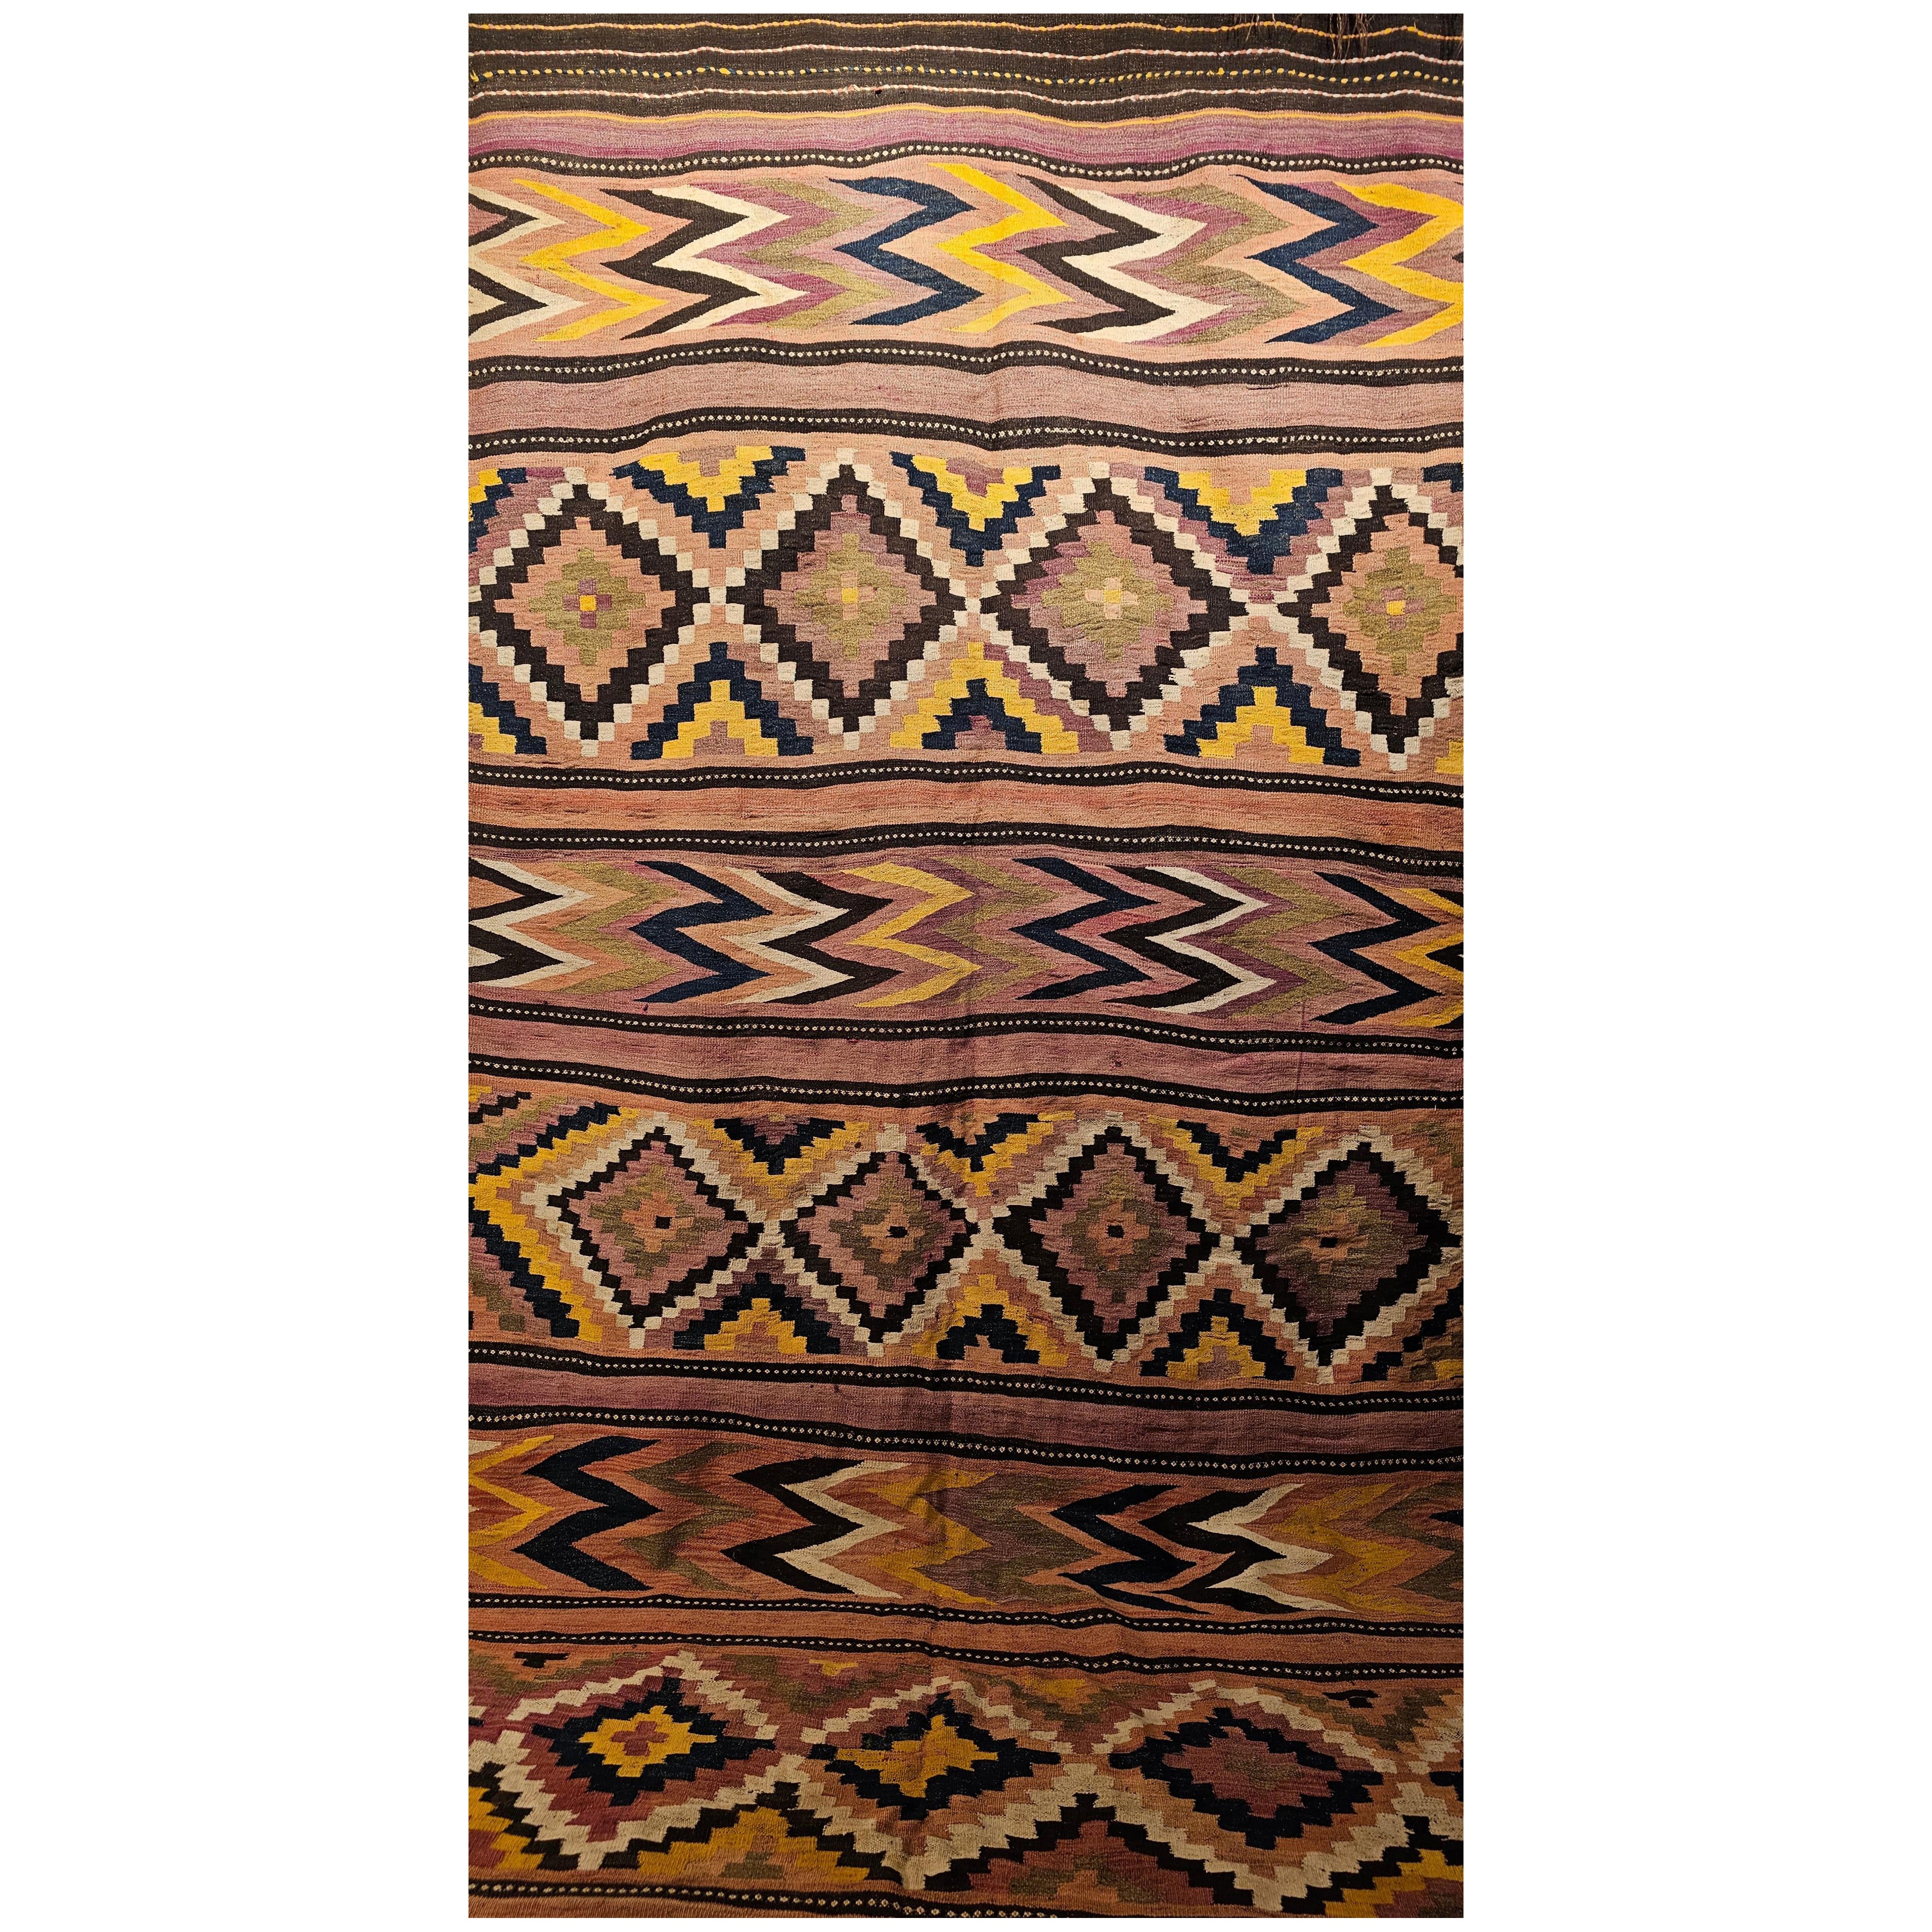 Vintage Oversized Moroccan Kilim in Geometric Pattern with Southwestern Colors